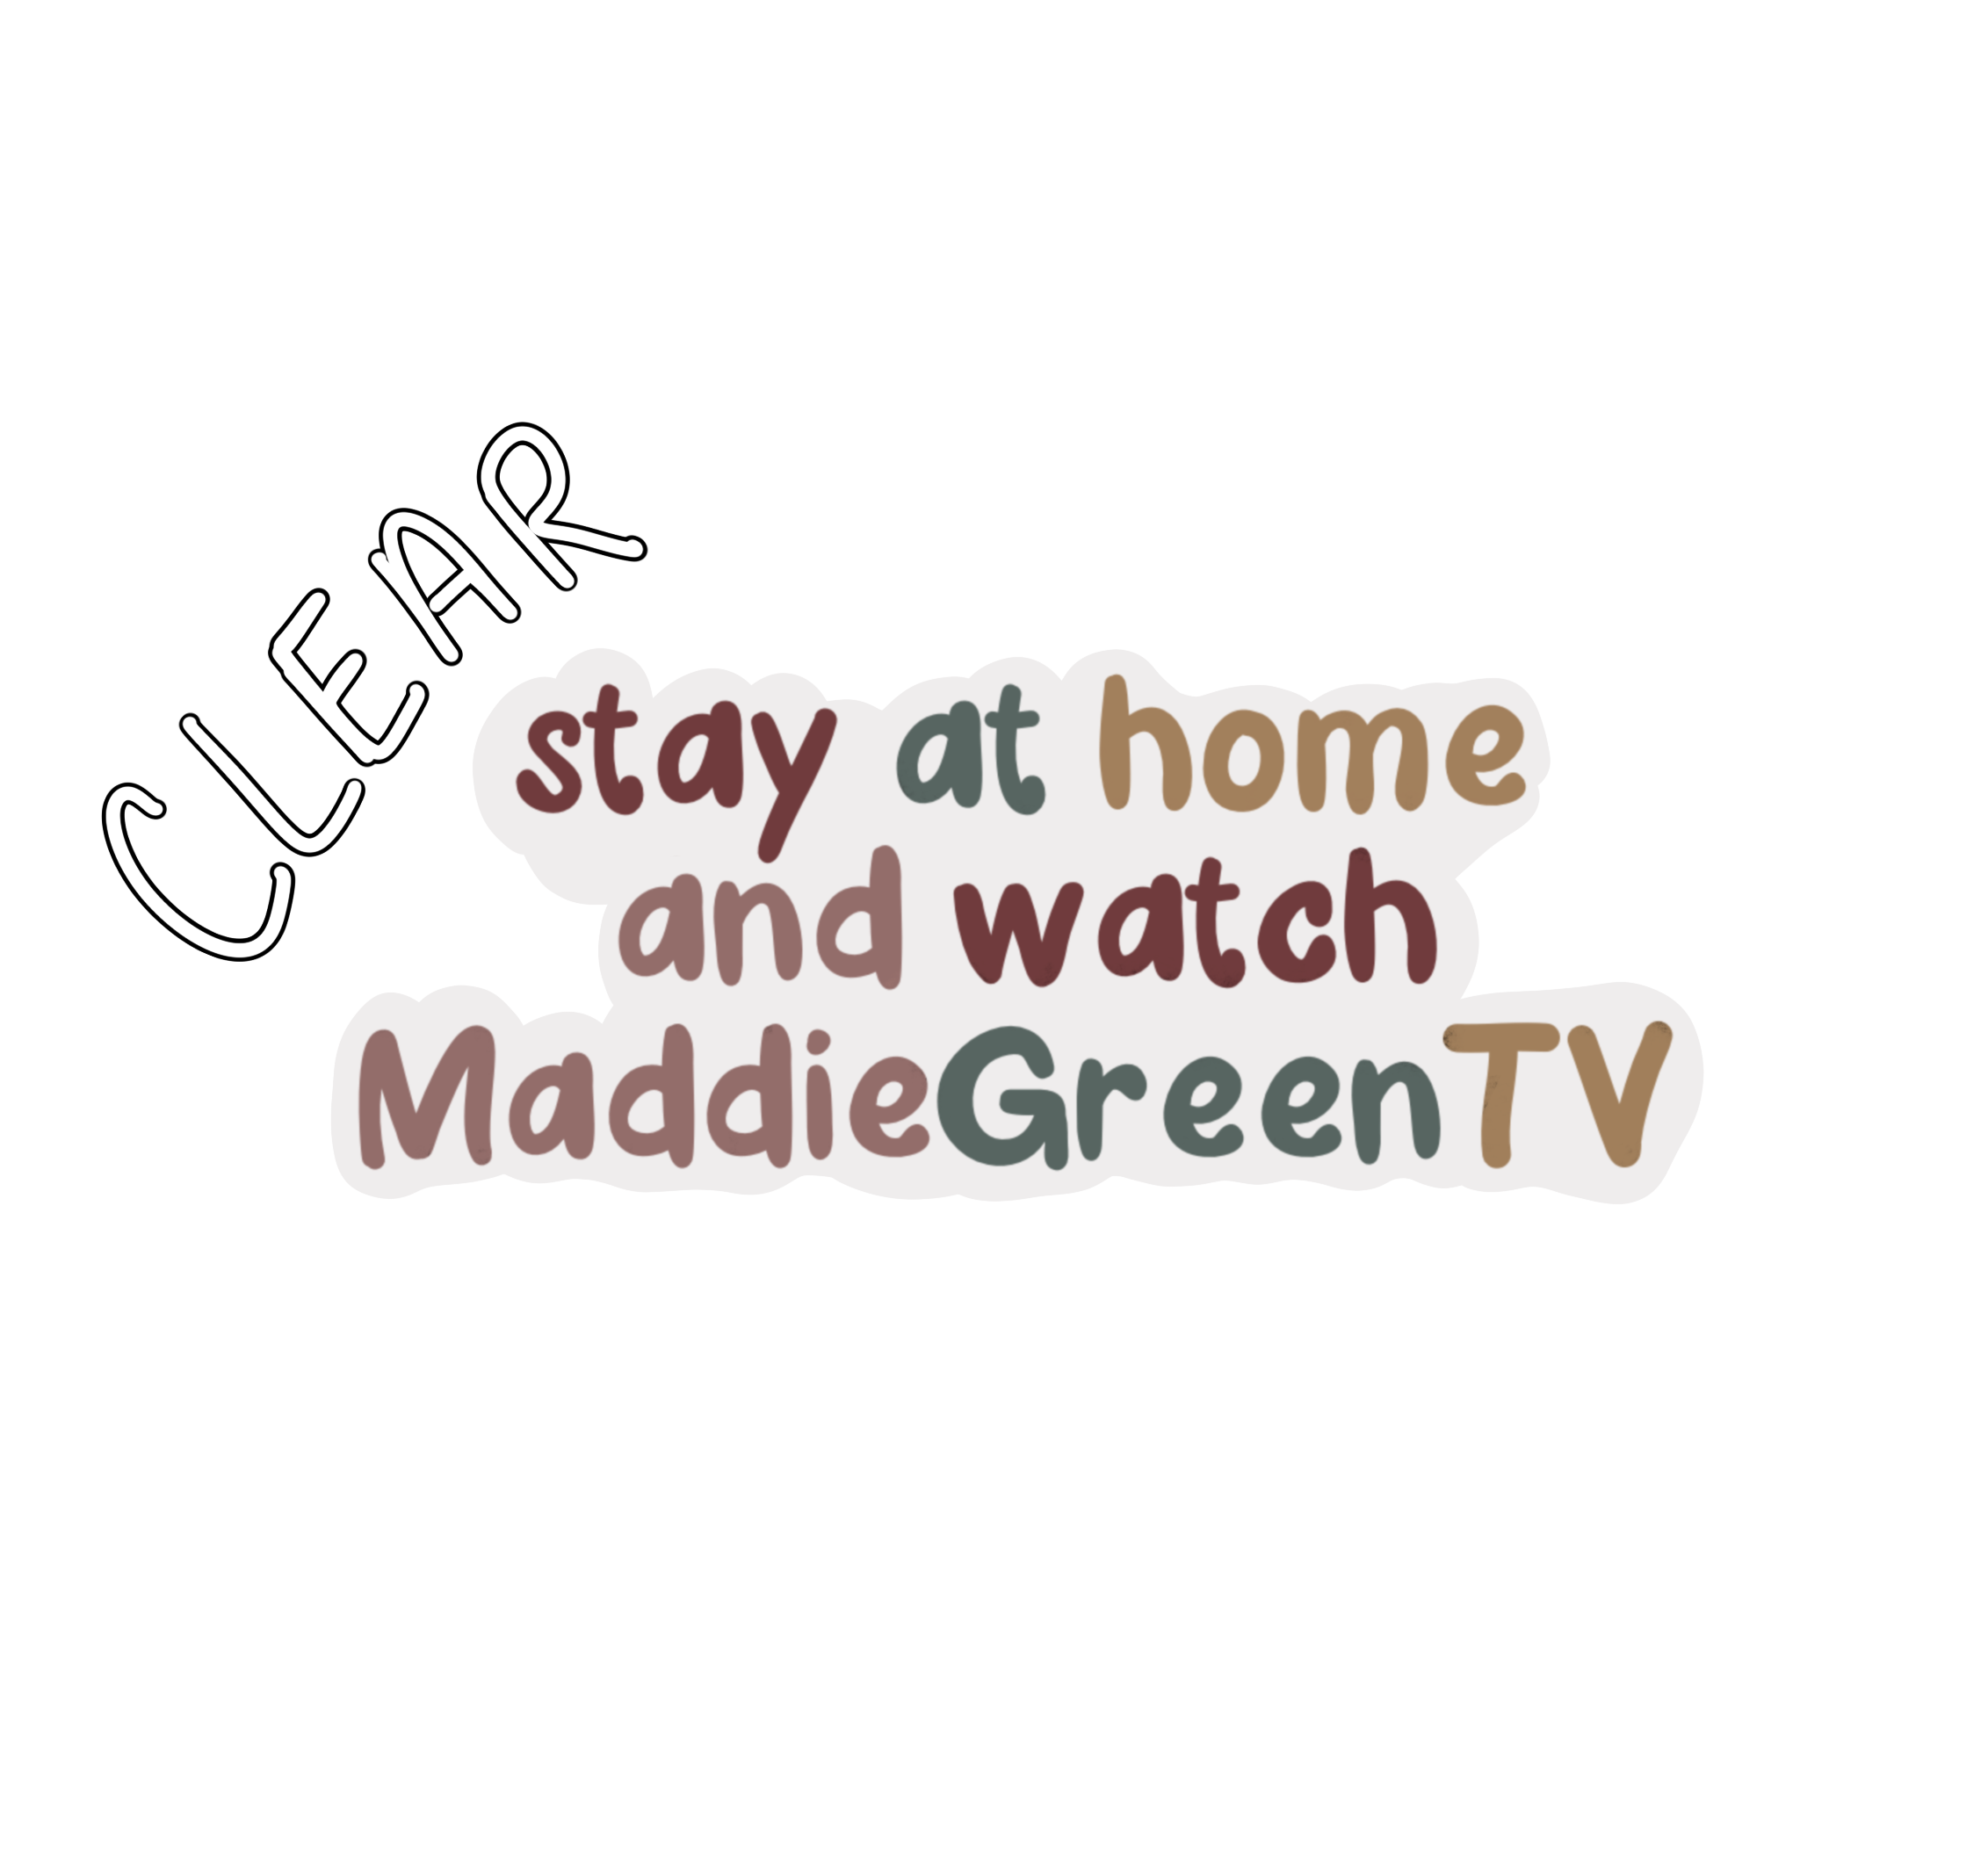 –　Watch　Waterproof　Home　Sticker　Vinyl　CLEAR　TV　Green　at　Maddie　Stay　and　Boutique　Maddie　Green